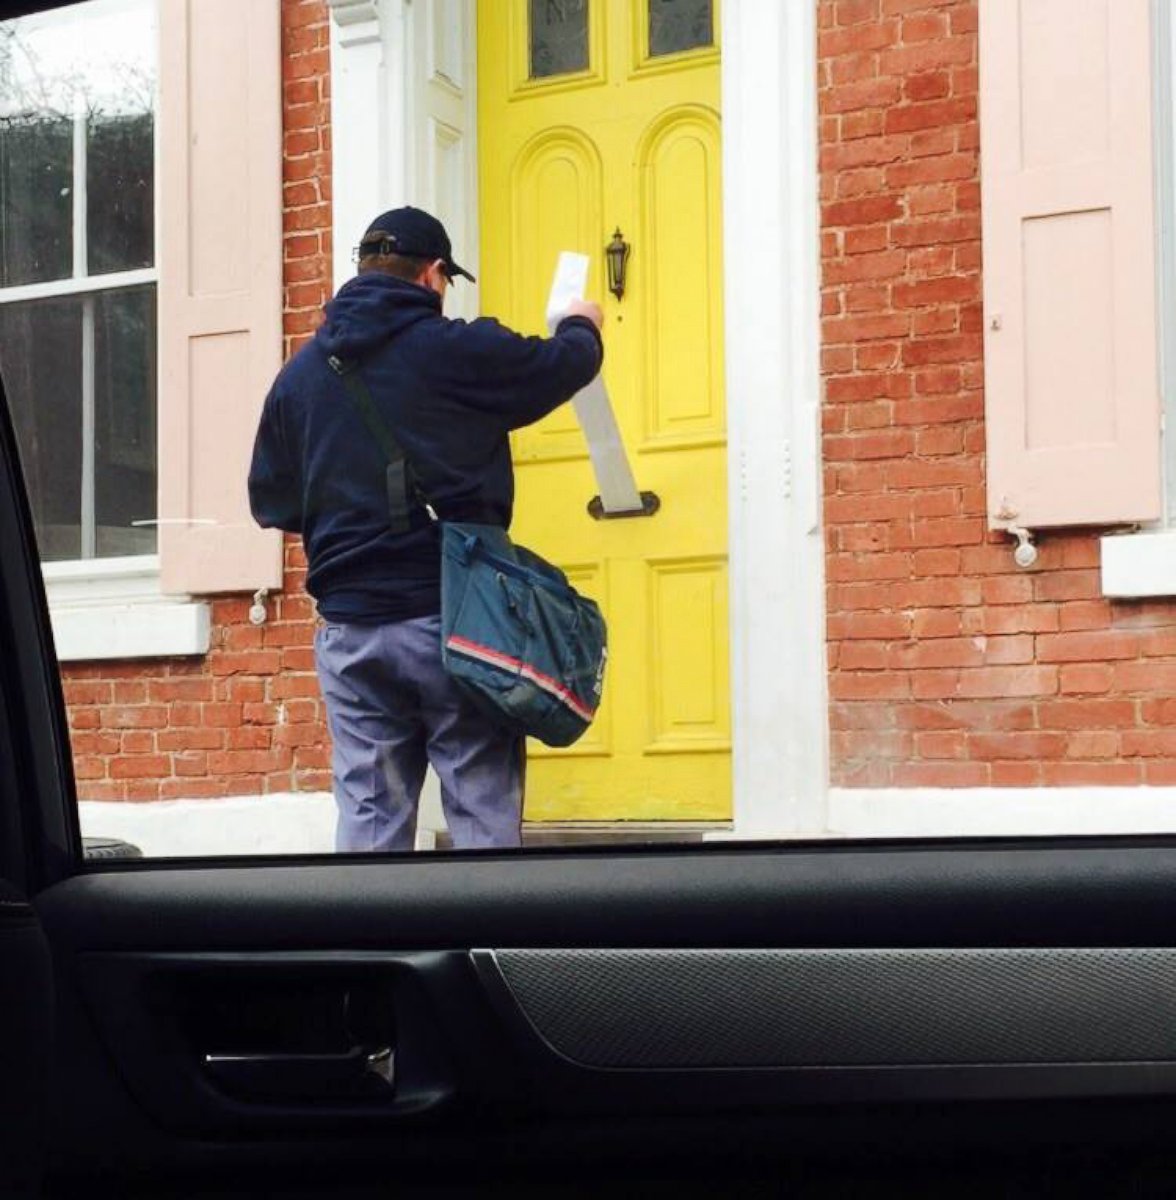 PHOTO: Billy Kelly and his wife decided to have some fun with the mailman on April Fools' Day.